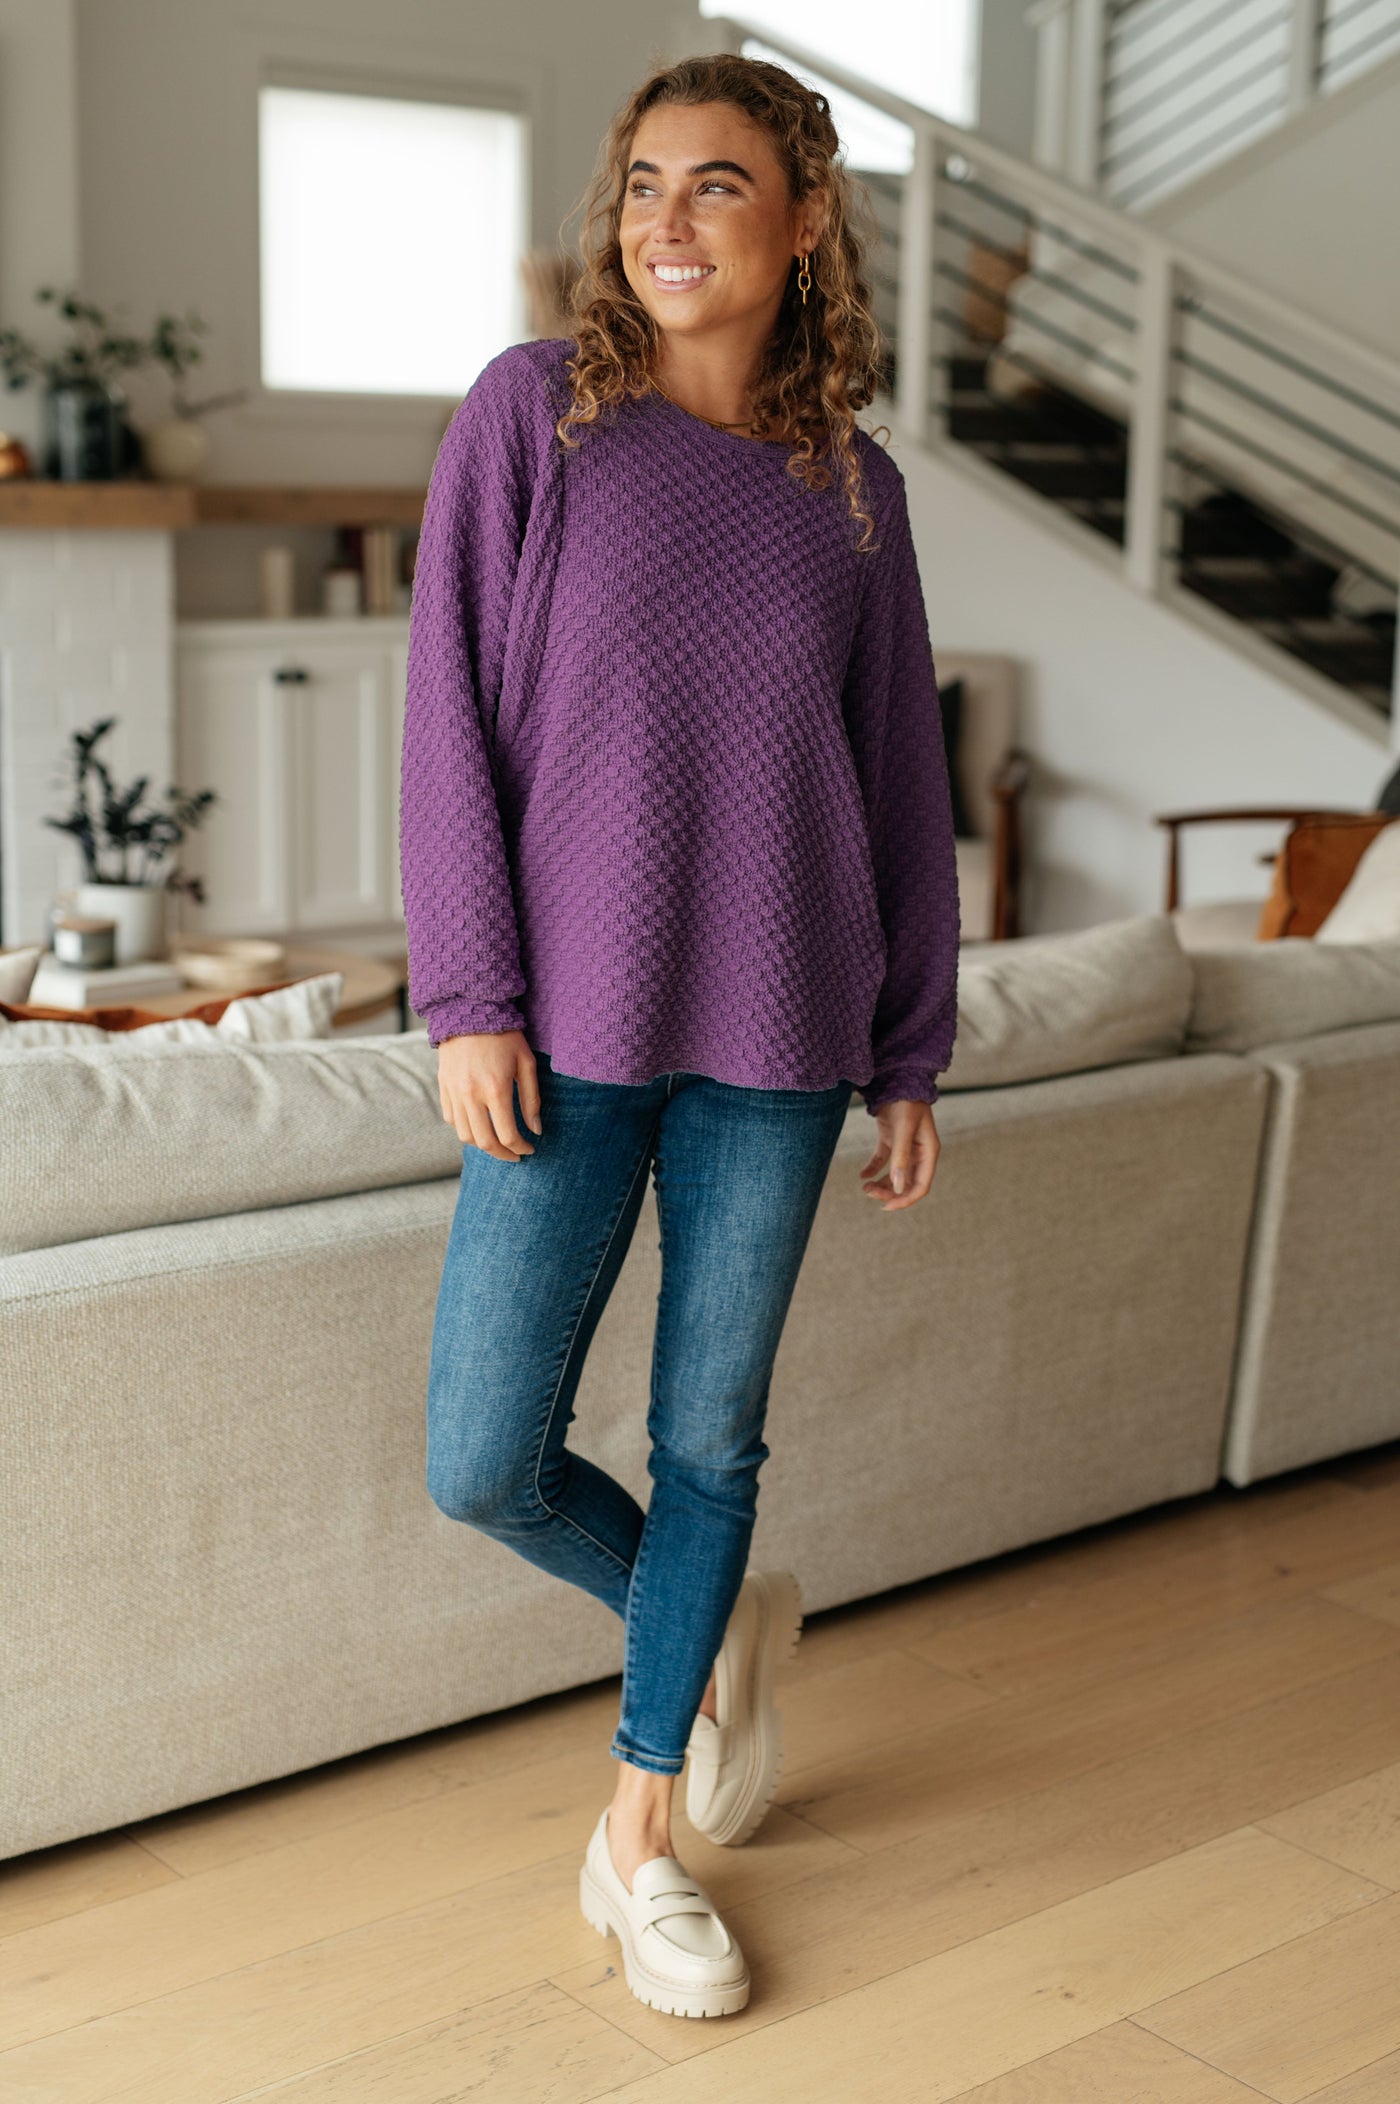 This Thought It Over Pullover is a perfect way to add texture to your look